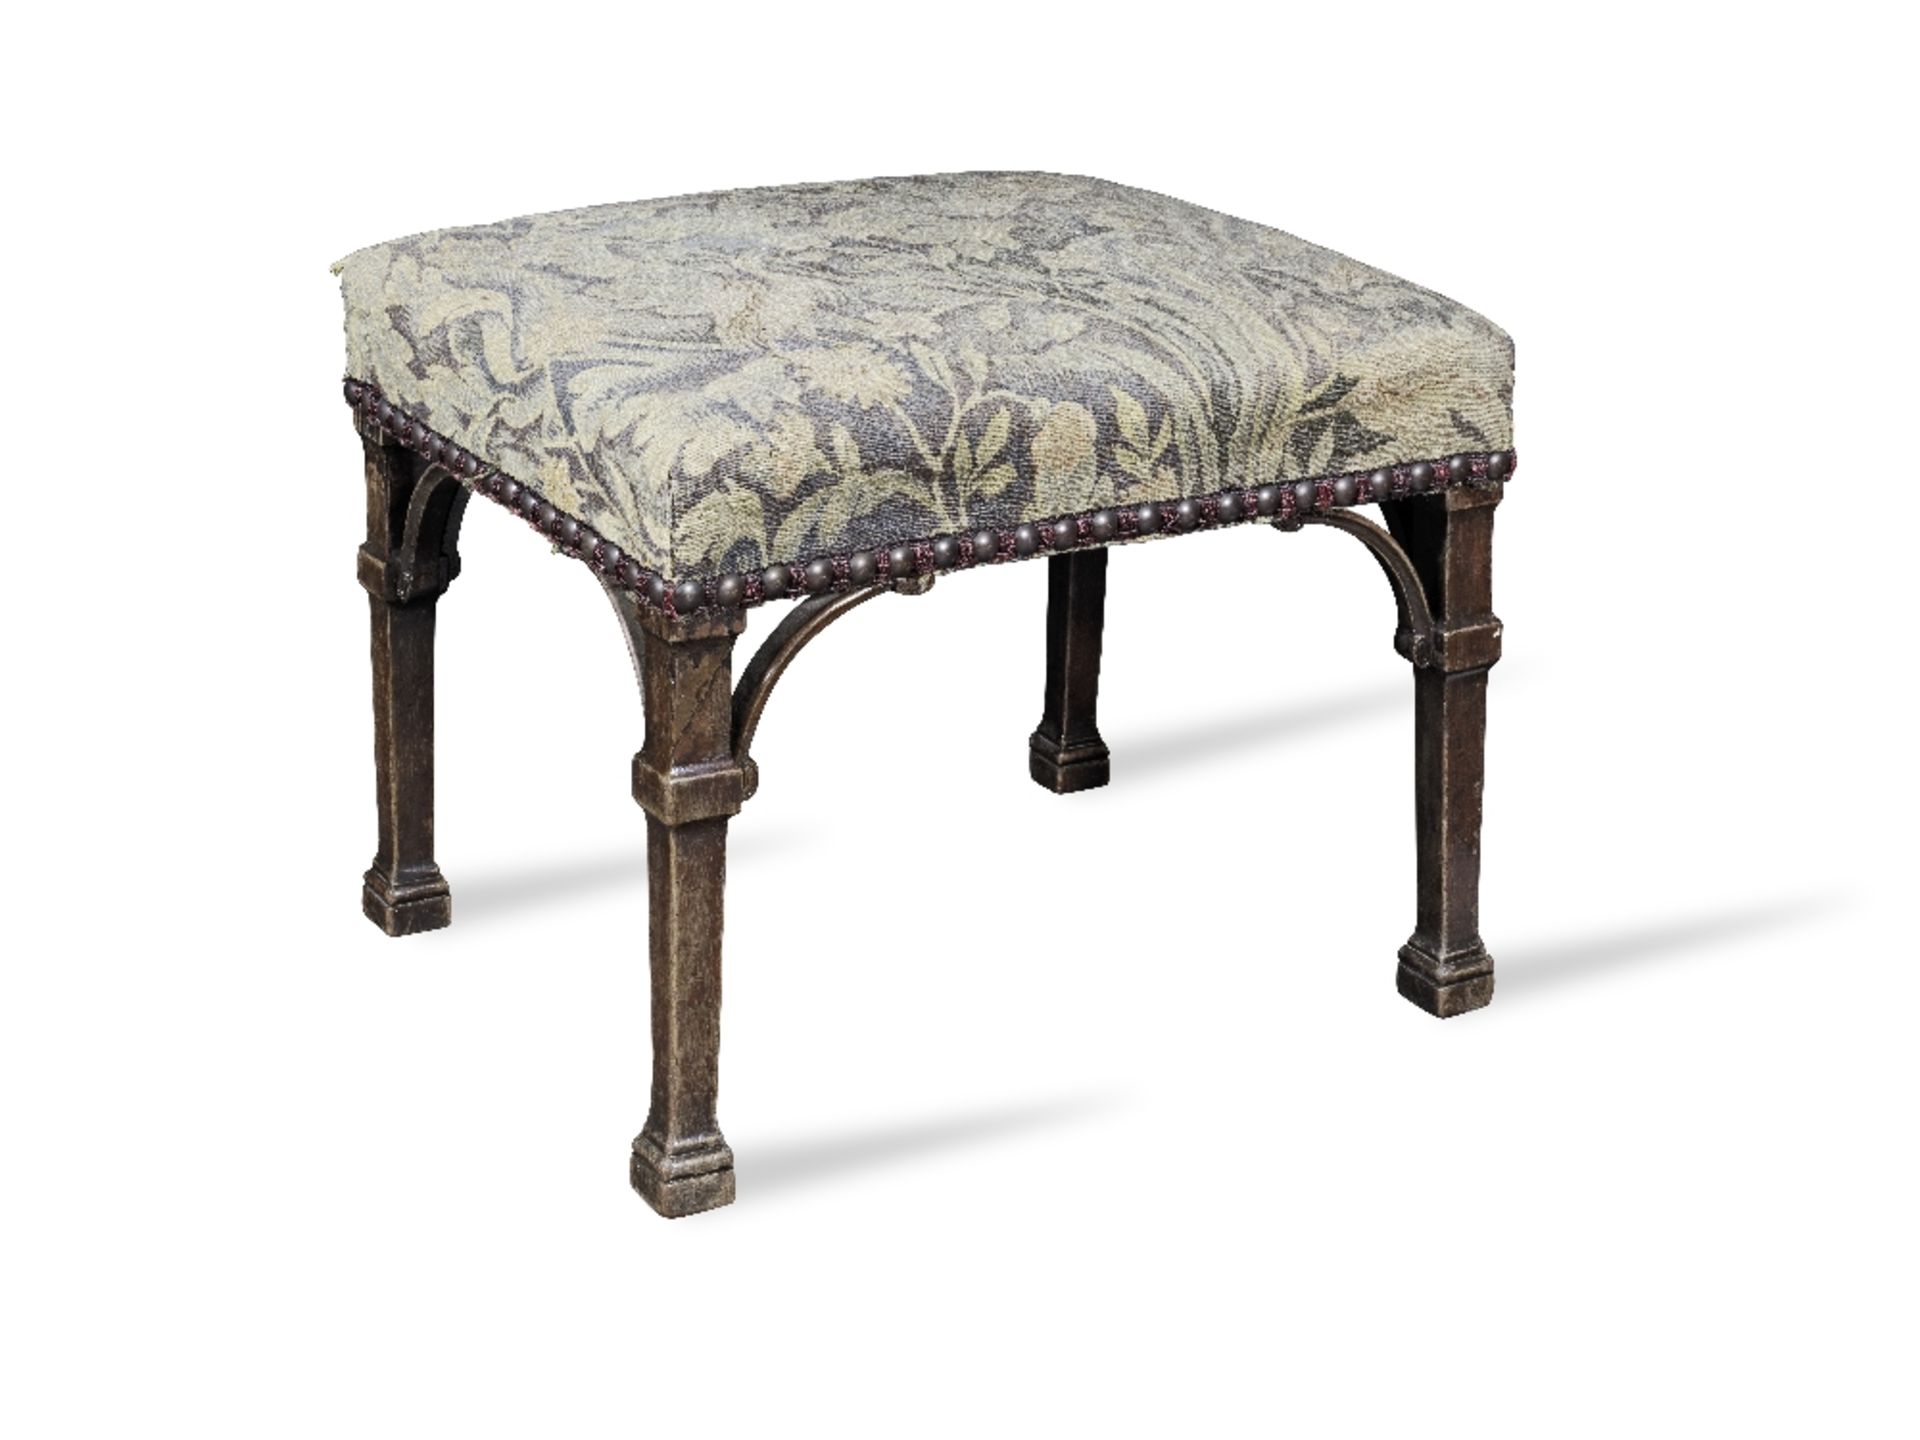 A George III and later mahogany stool late 18th century and later